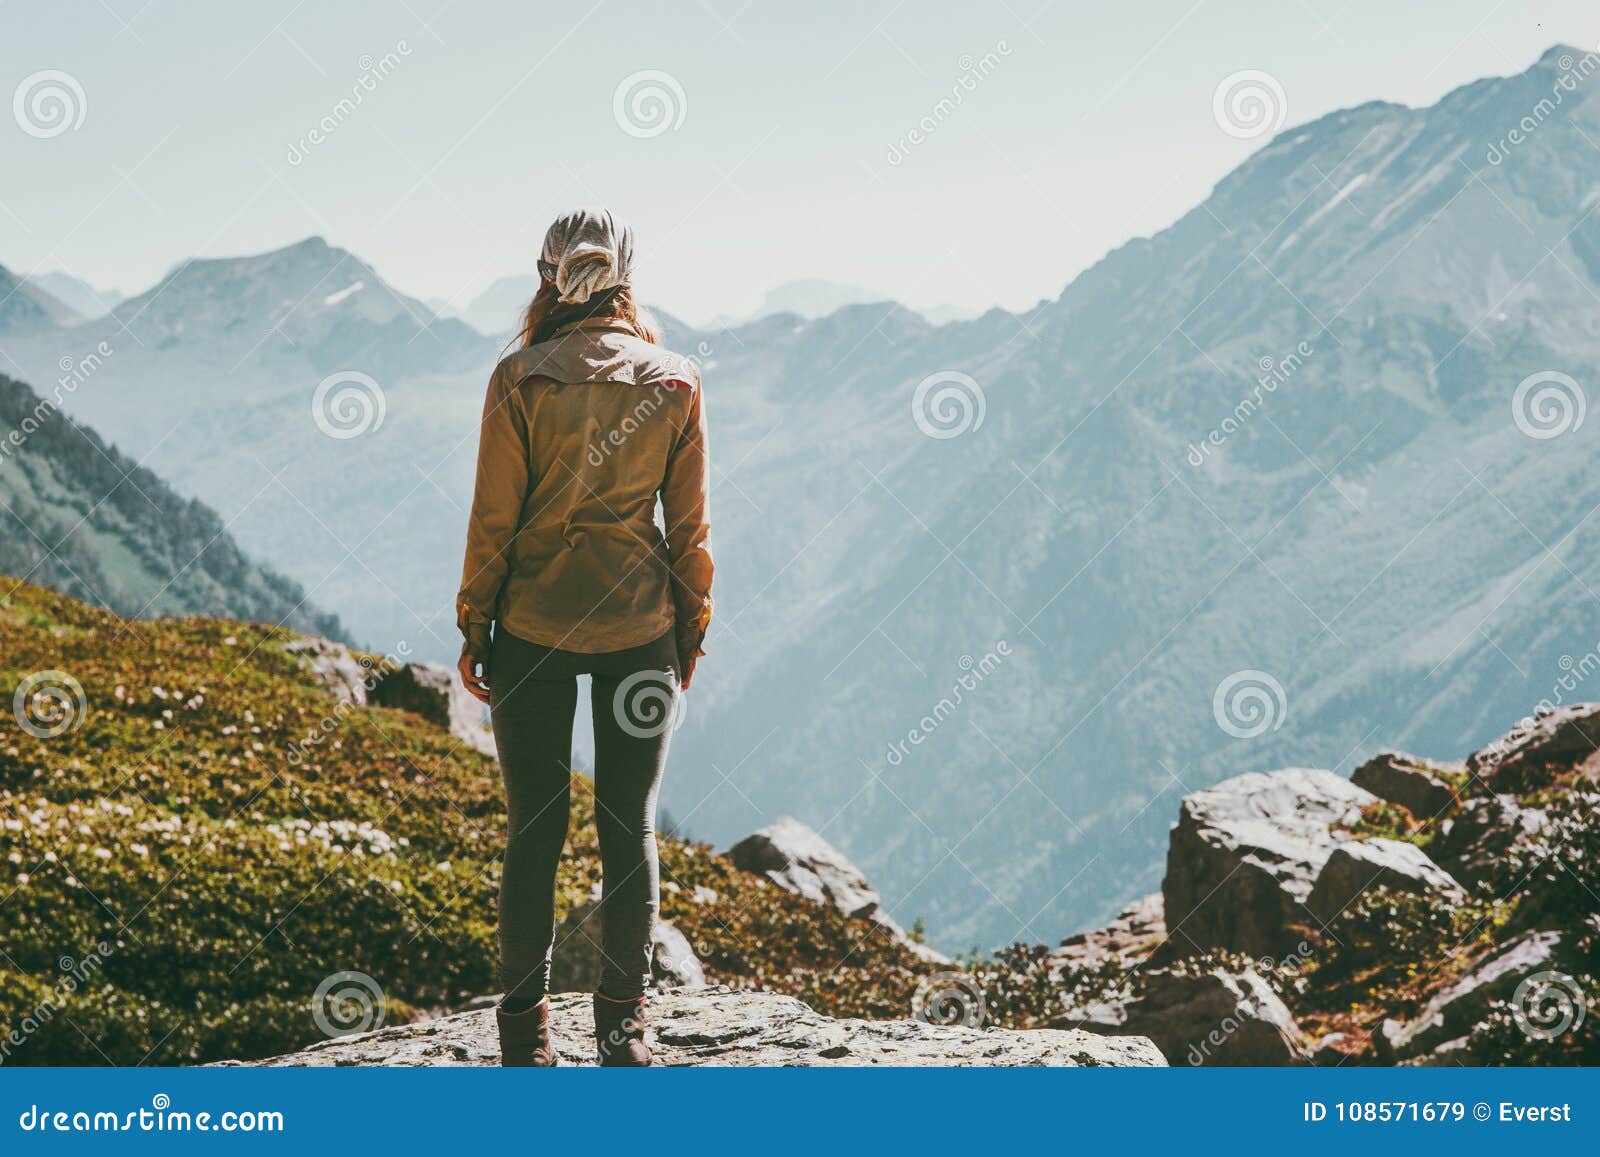 woman alone standing in mountains wander landscape